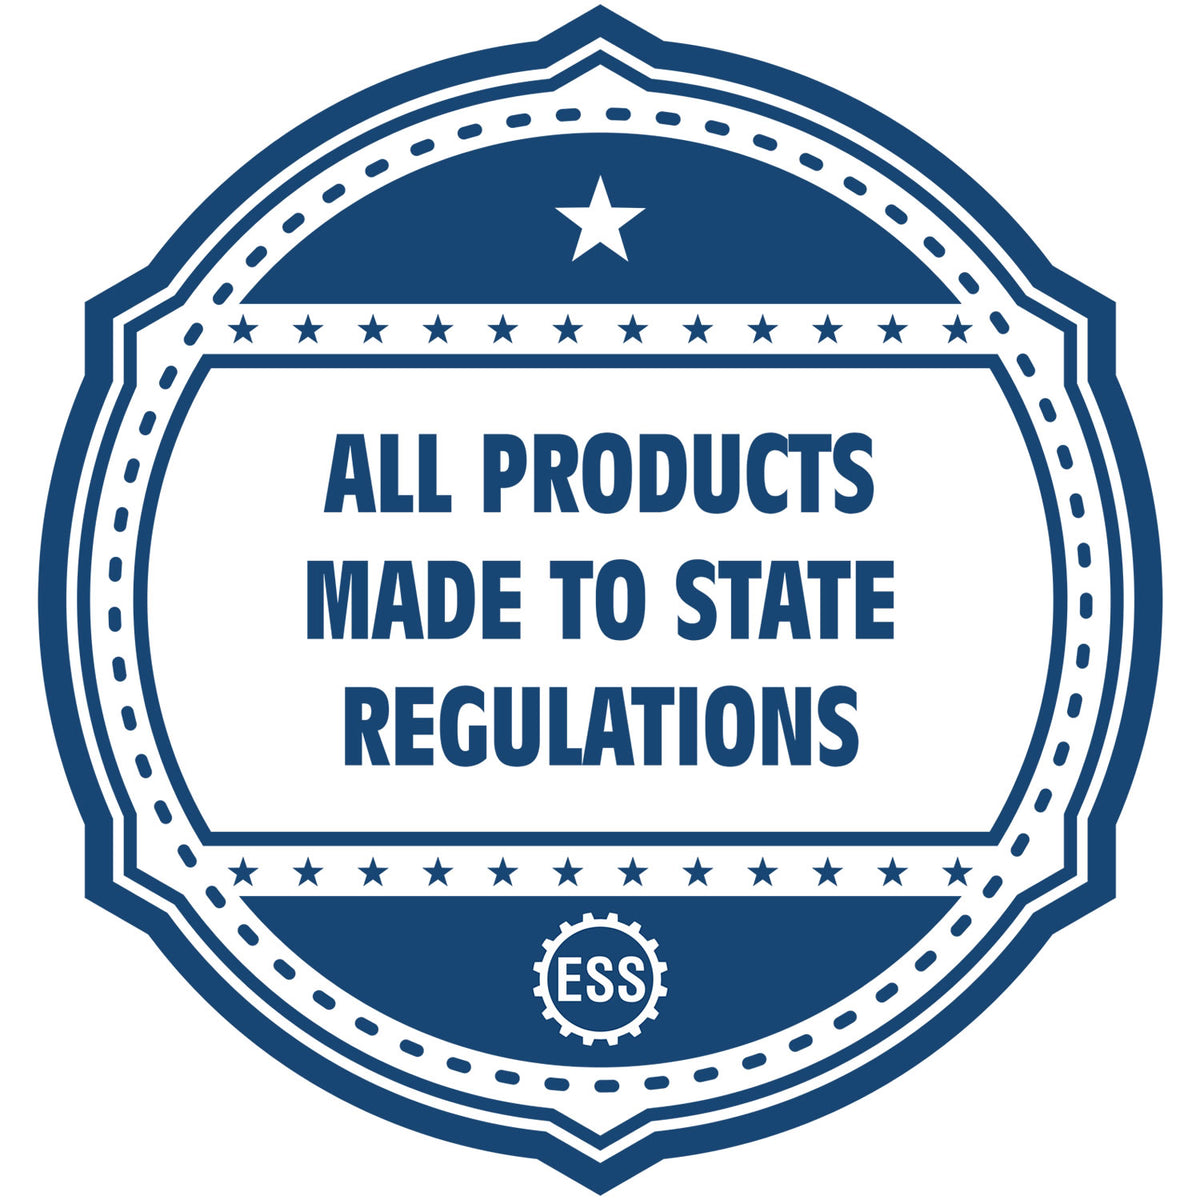 An icon or badge element for the Heavy-Duty Texas Rectangular Notary Stamp showing that this product is made in compliance with state regulations.